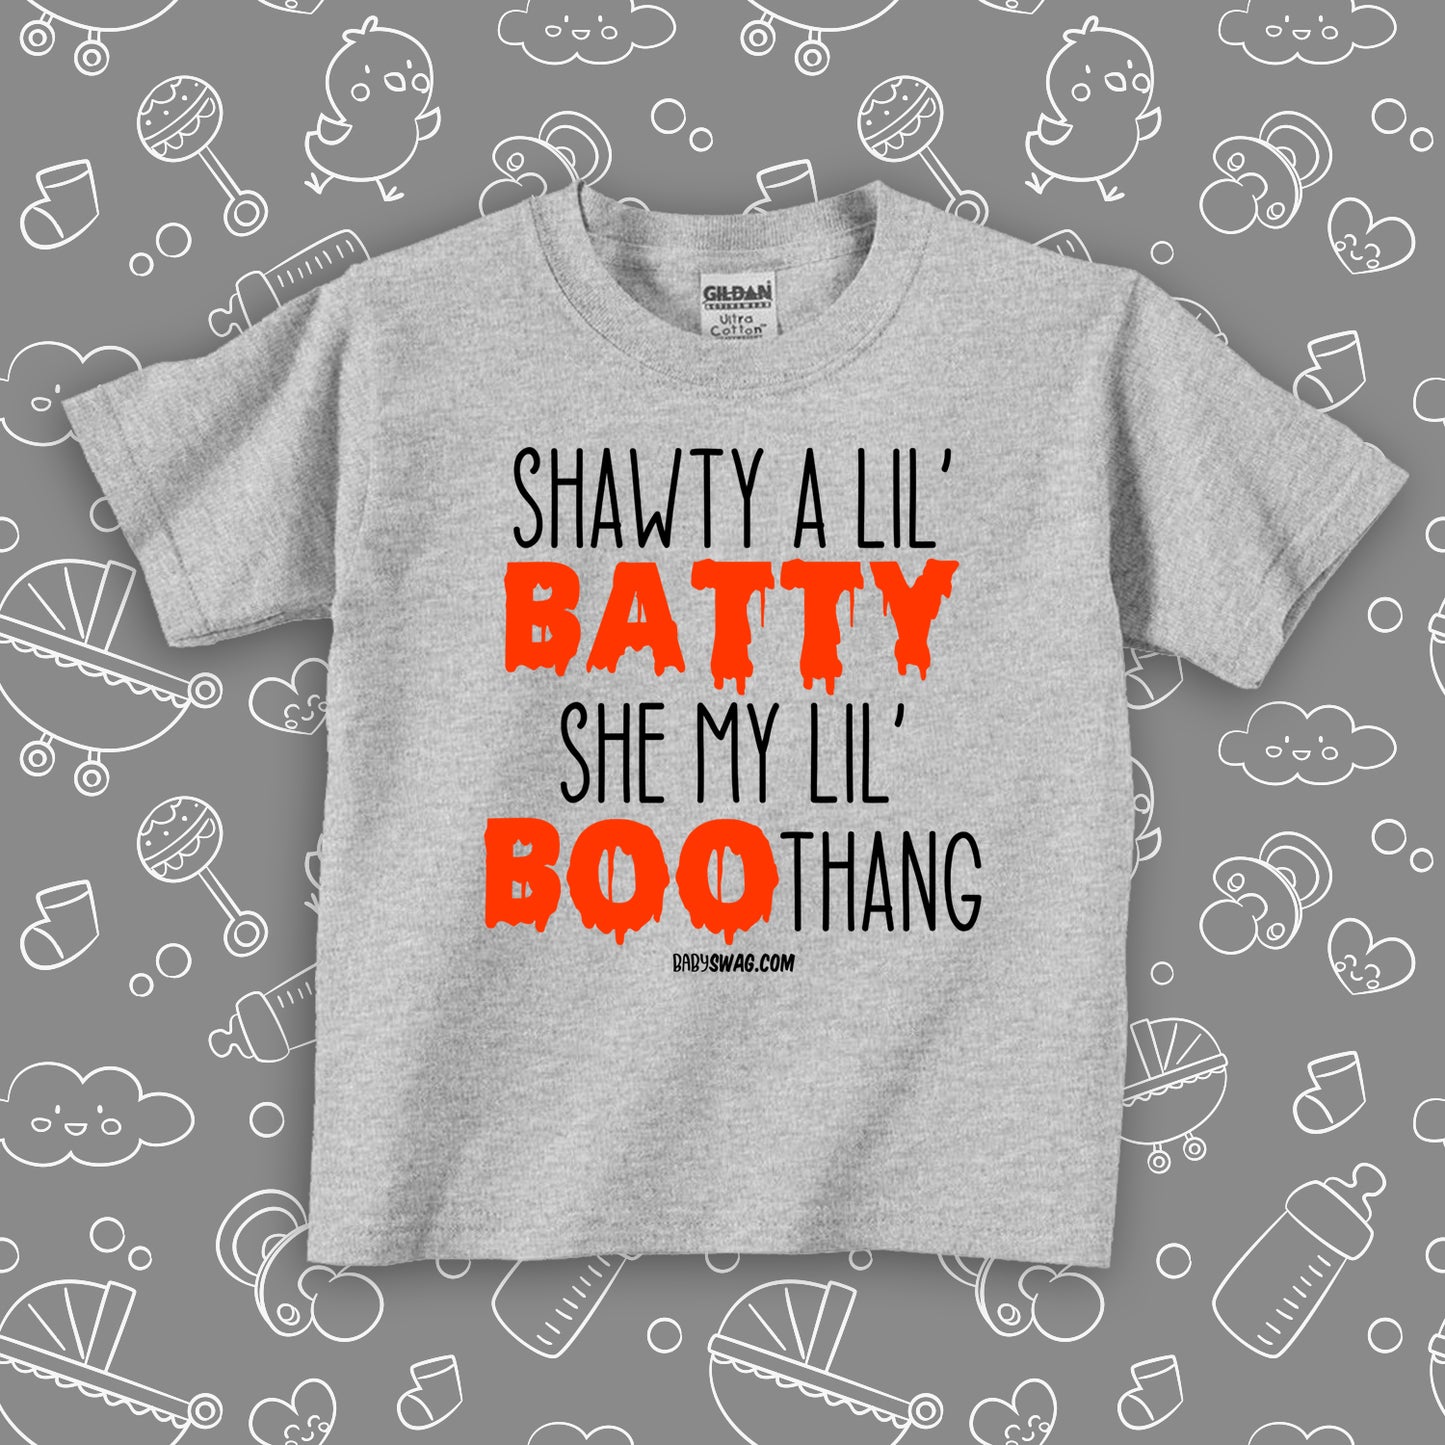 Toddler shirt with saying "Shawty A Lil' Batty, She My Lil" Boo-thang" in grey.  